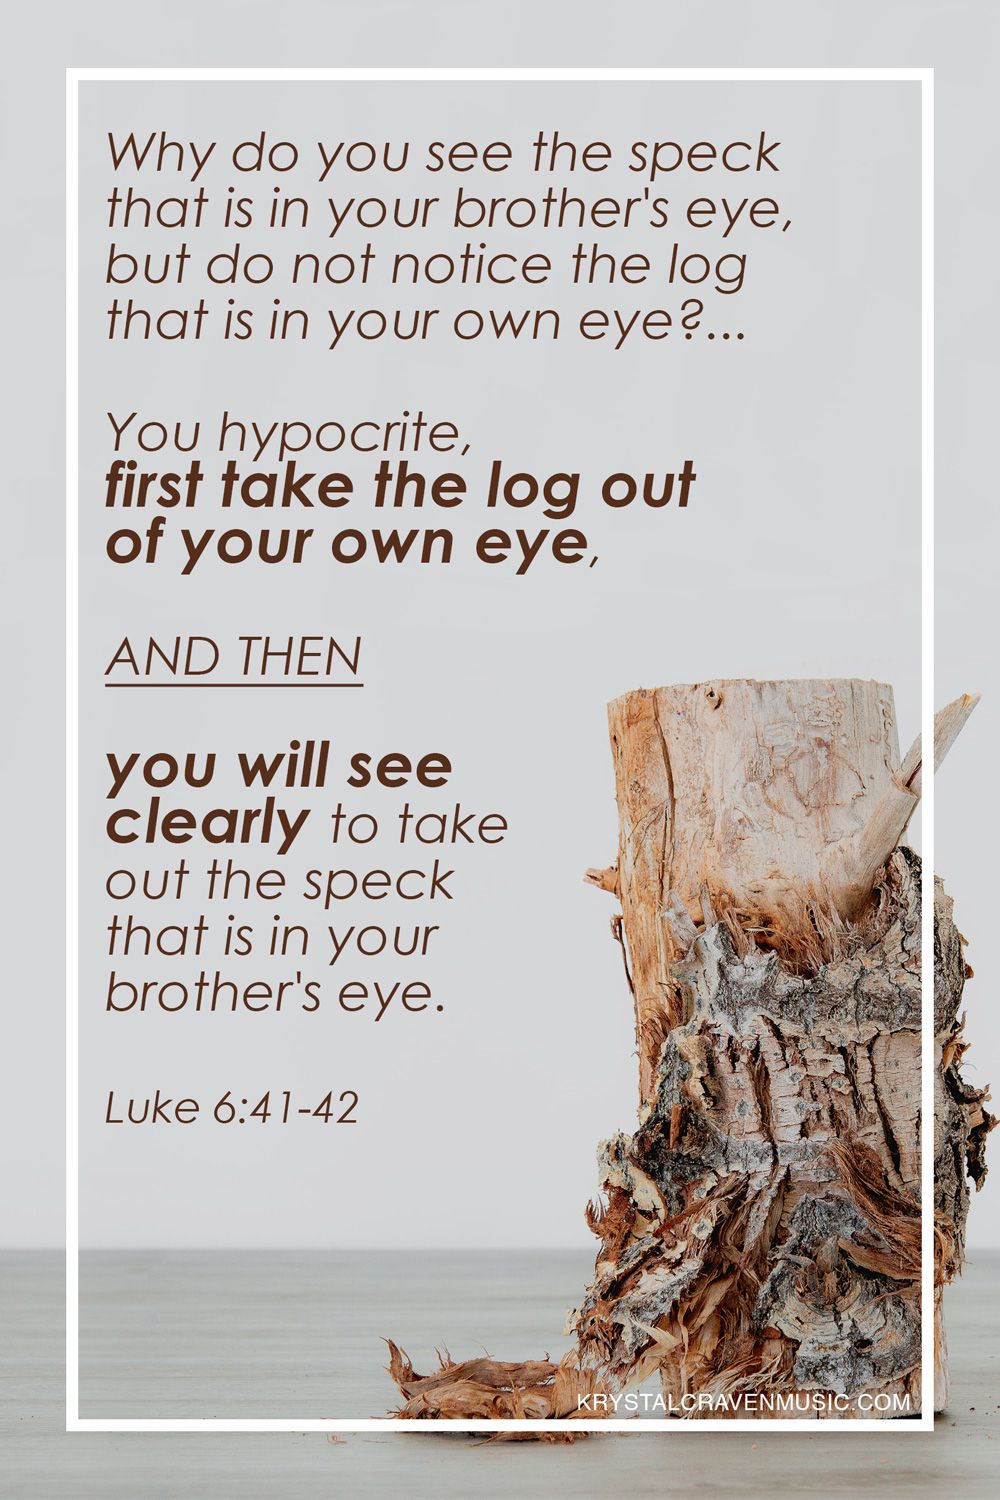 The bible verse text of Luke 6:41-42, "Why do you see the speck that is in your brother's eye, but do not notice the log that is in your own eye? You hypocrite, first take the log out of your own eye, and then you will see clearly to take out the speck that is in your brother's eye. The text overlays a log stump sitting upright on the floor with specks of bark beside it.